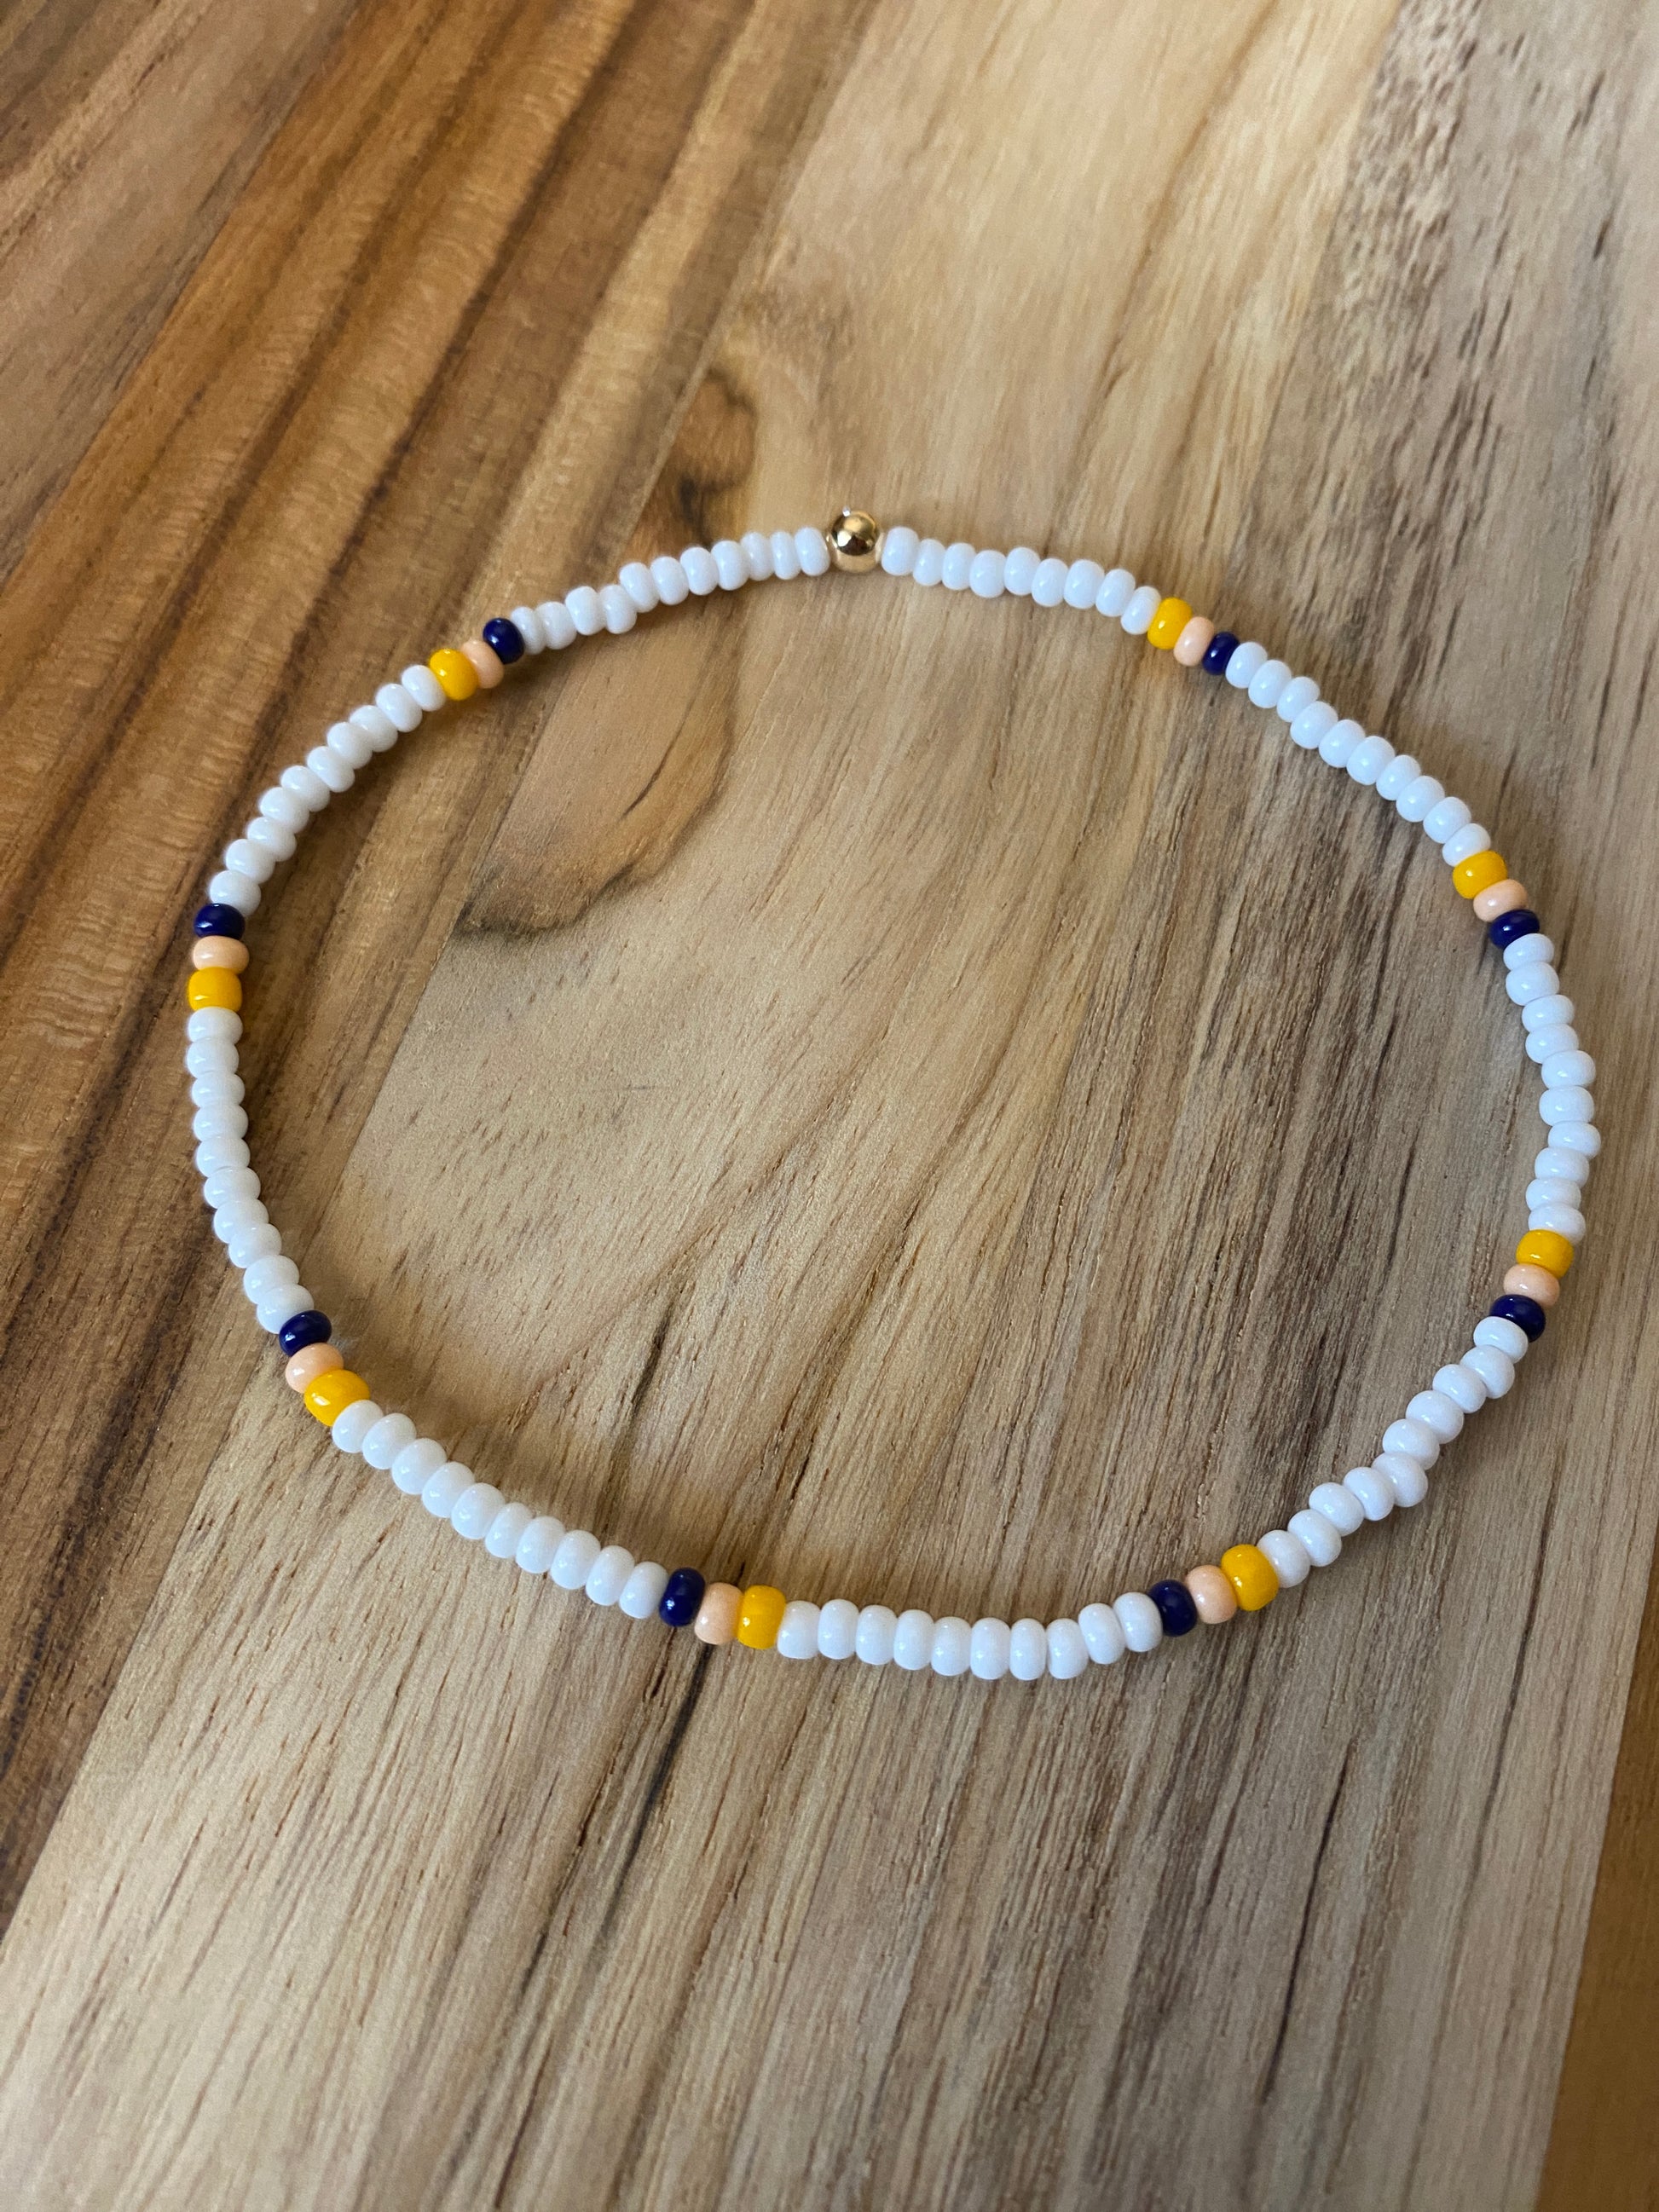 Dainty Beach Vibe White Seed Bead Ankle Bracelet Anklet with Navy and Yellow Accents - My Urban Gems